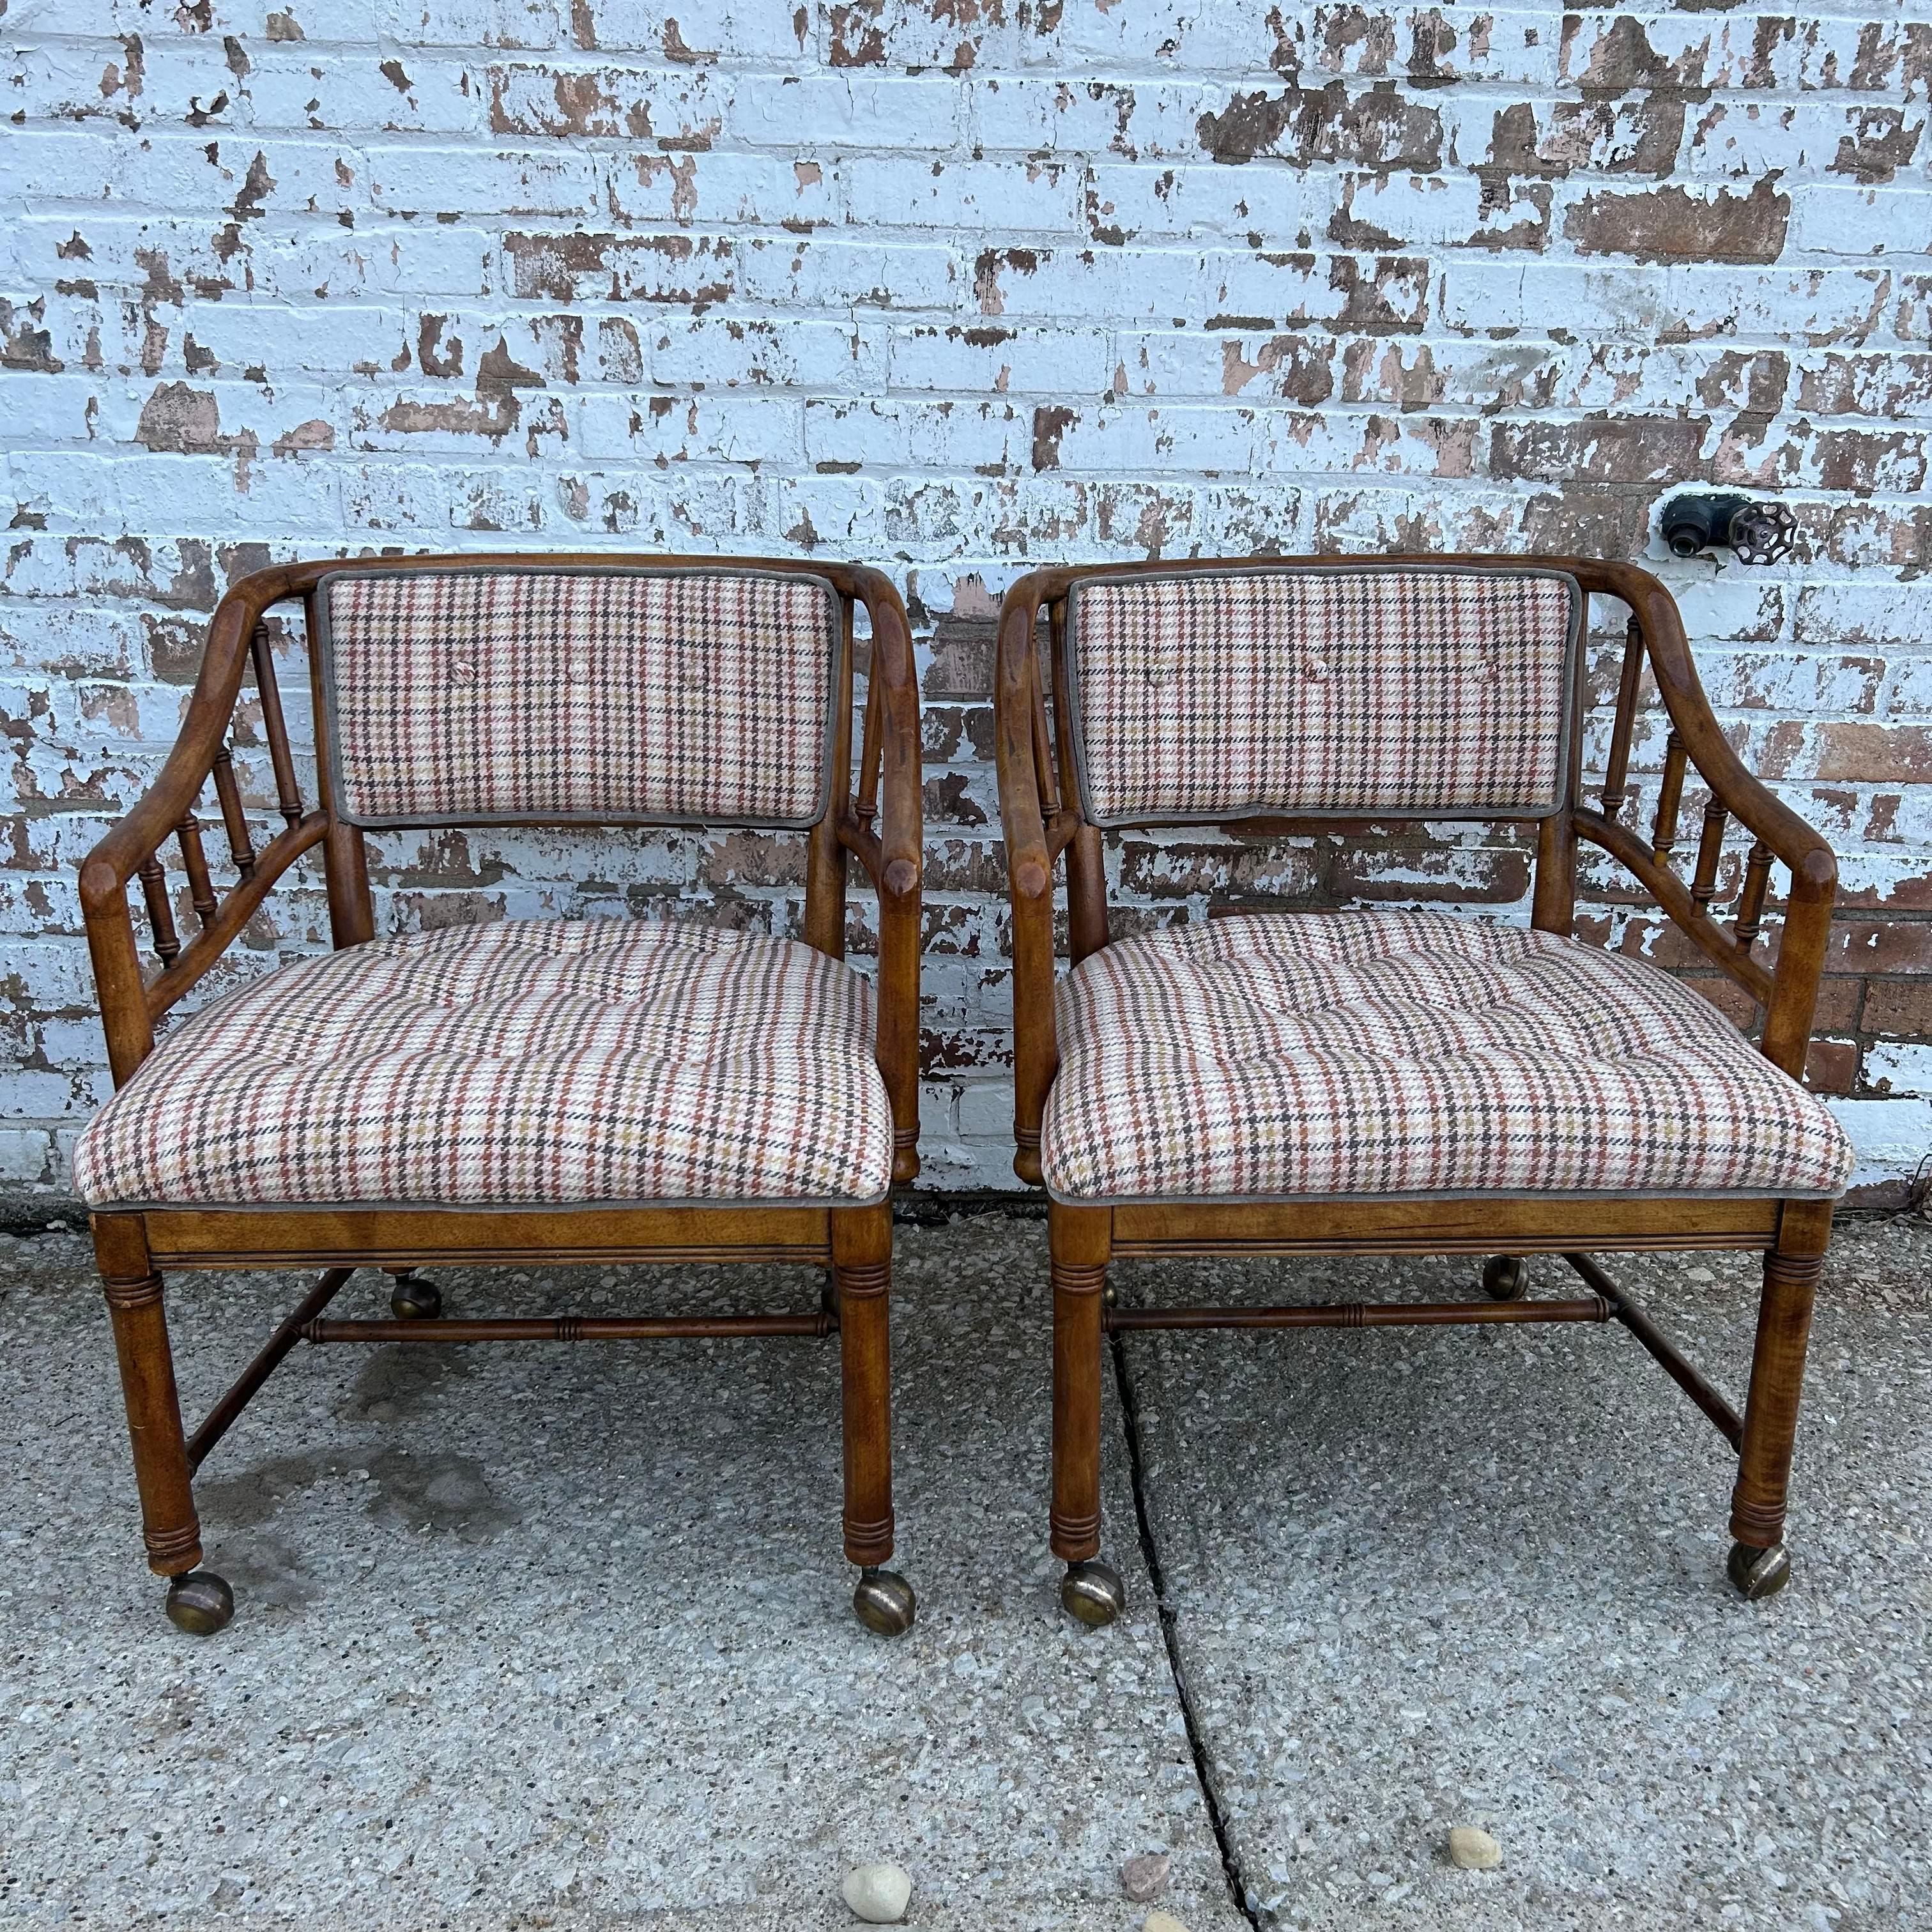 Adorably chic, this 1960s chair pair from Plunkett Furniture Co, have been wonderfully reimagined. Beautiful faux bamboo frames, with their honeyed warmth, bring out the best in the pink infused plaid. Low contrast piping and smoothly rolling brass